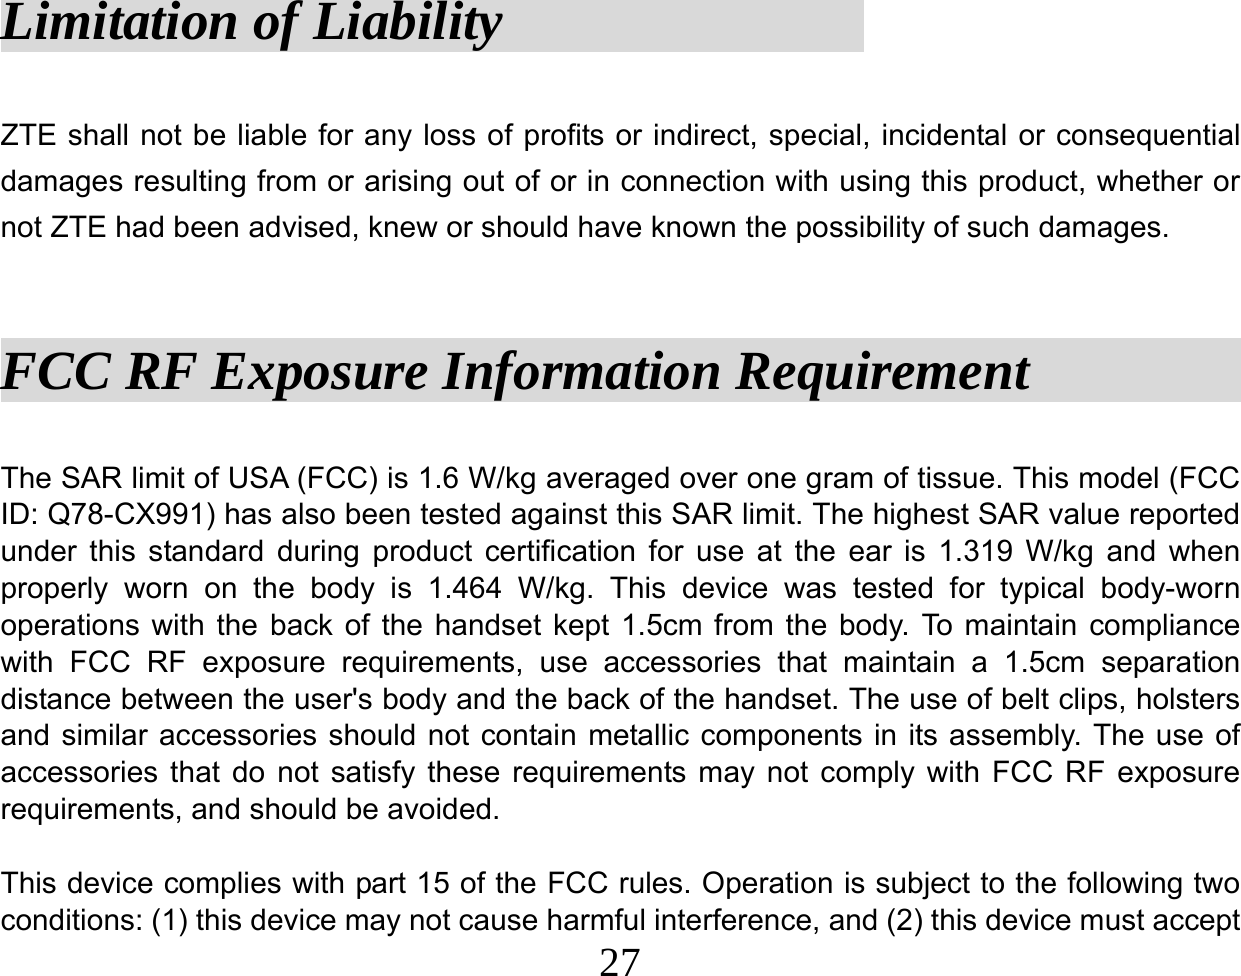  27Limitation of Liability              ZTE shall not be liable for any loss of profits or indirect, special, incidental or consequential damages resulting from or arising out of or in connection with using this product, whether or not ZTE had been advised, knew or should have known the possibility of such damages.  FCC RF Exposure Information Requirement             The SAR limit of USA (FCC) is 1.6 W/kg averaged over one gram of tissue. This model (FCC ID: Q78-CX991) has also been tested against this SAR limit. The highest SAR value reported under this standard during product certification for use at the ear is 1.319 W/kg and when properly worn on the body is 1.464 W/kg. This device was tested for typical body-worn operations with the back of the handset kept 1.5cm from the body. To maintain compliance with FCC RF exposure requirements, use accessories that maintain a 1.5cm separation distance between the user&apos;s body and the back of the handset. The use of belt clips, holsters and similar accessories should not contain metallic components in its assembly. The use of accessories that do not satisfy these requirements may not comply with FCC RF exposure requirements, and should be avoided.  This device complies with part 15 of the FCC rules. Operation is subject to the following two conditions: (1) this device may not cause harmful interference, and (2) this device must accept 